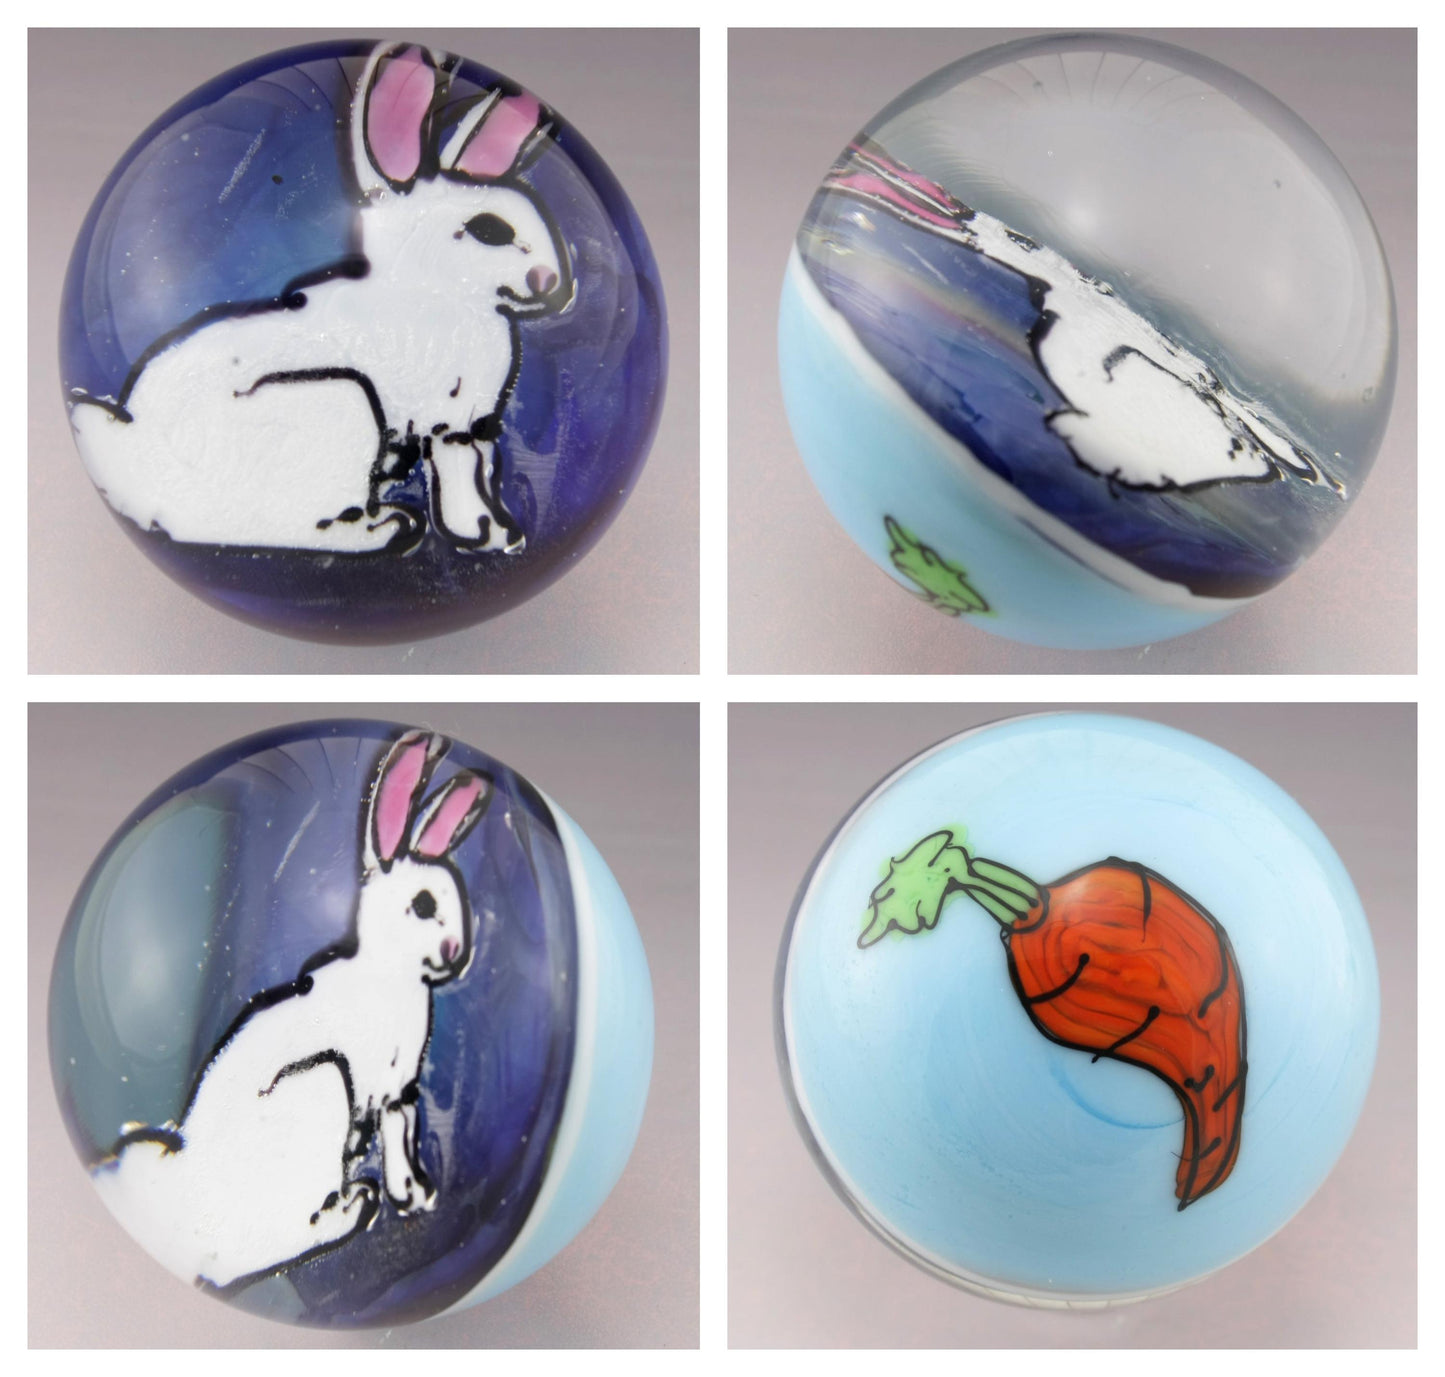 White Bunny Rabbit with Orange Carrot on Baby Blue backing Marble m144